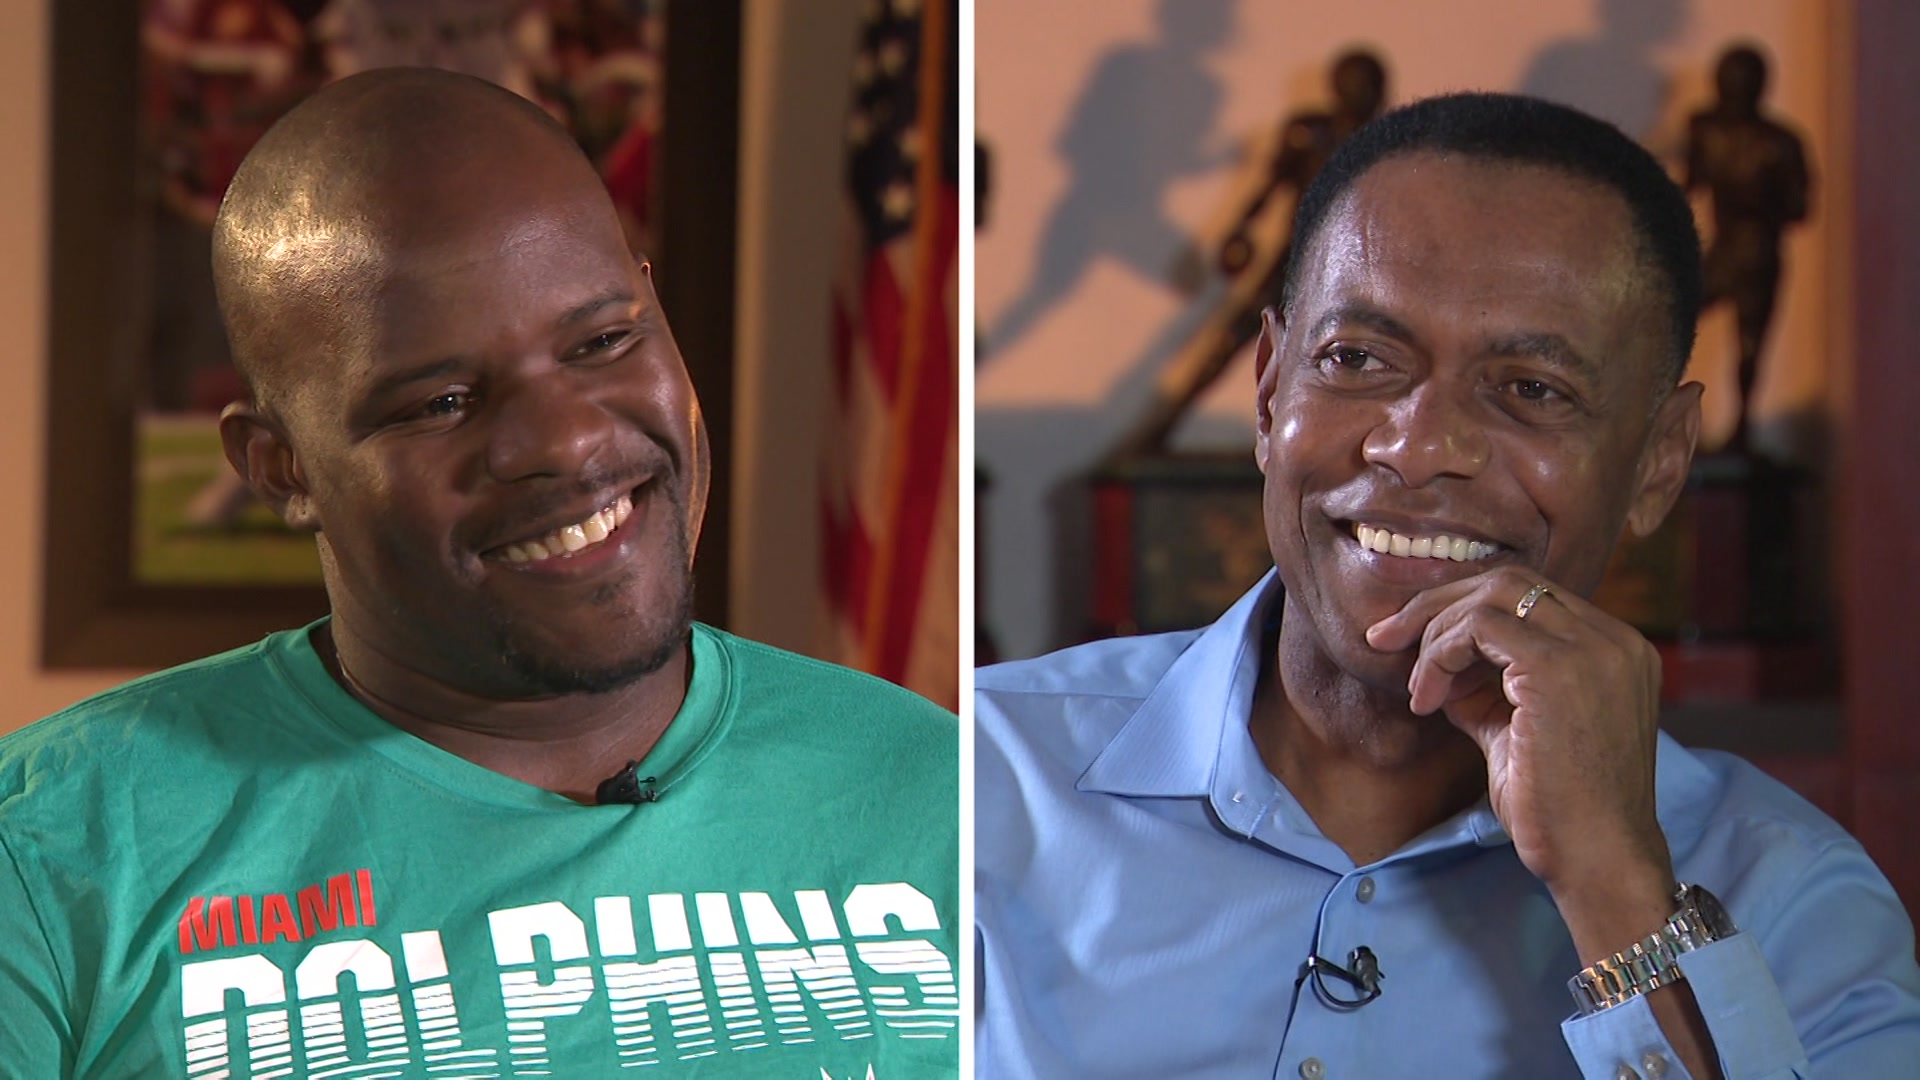 Inteview with Miami Dolphins head coach Brian Flores